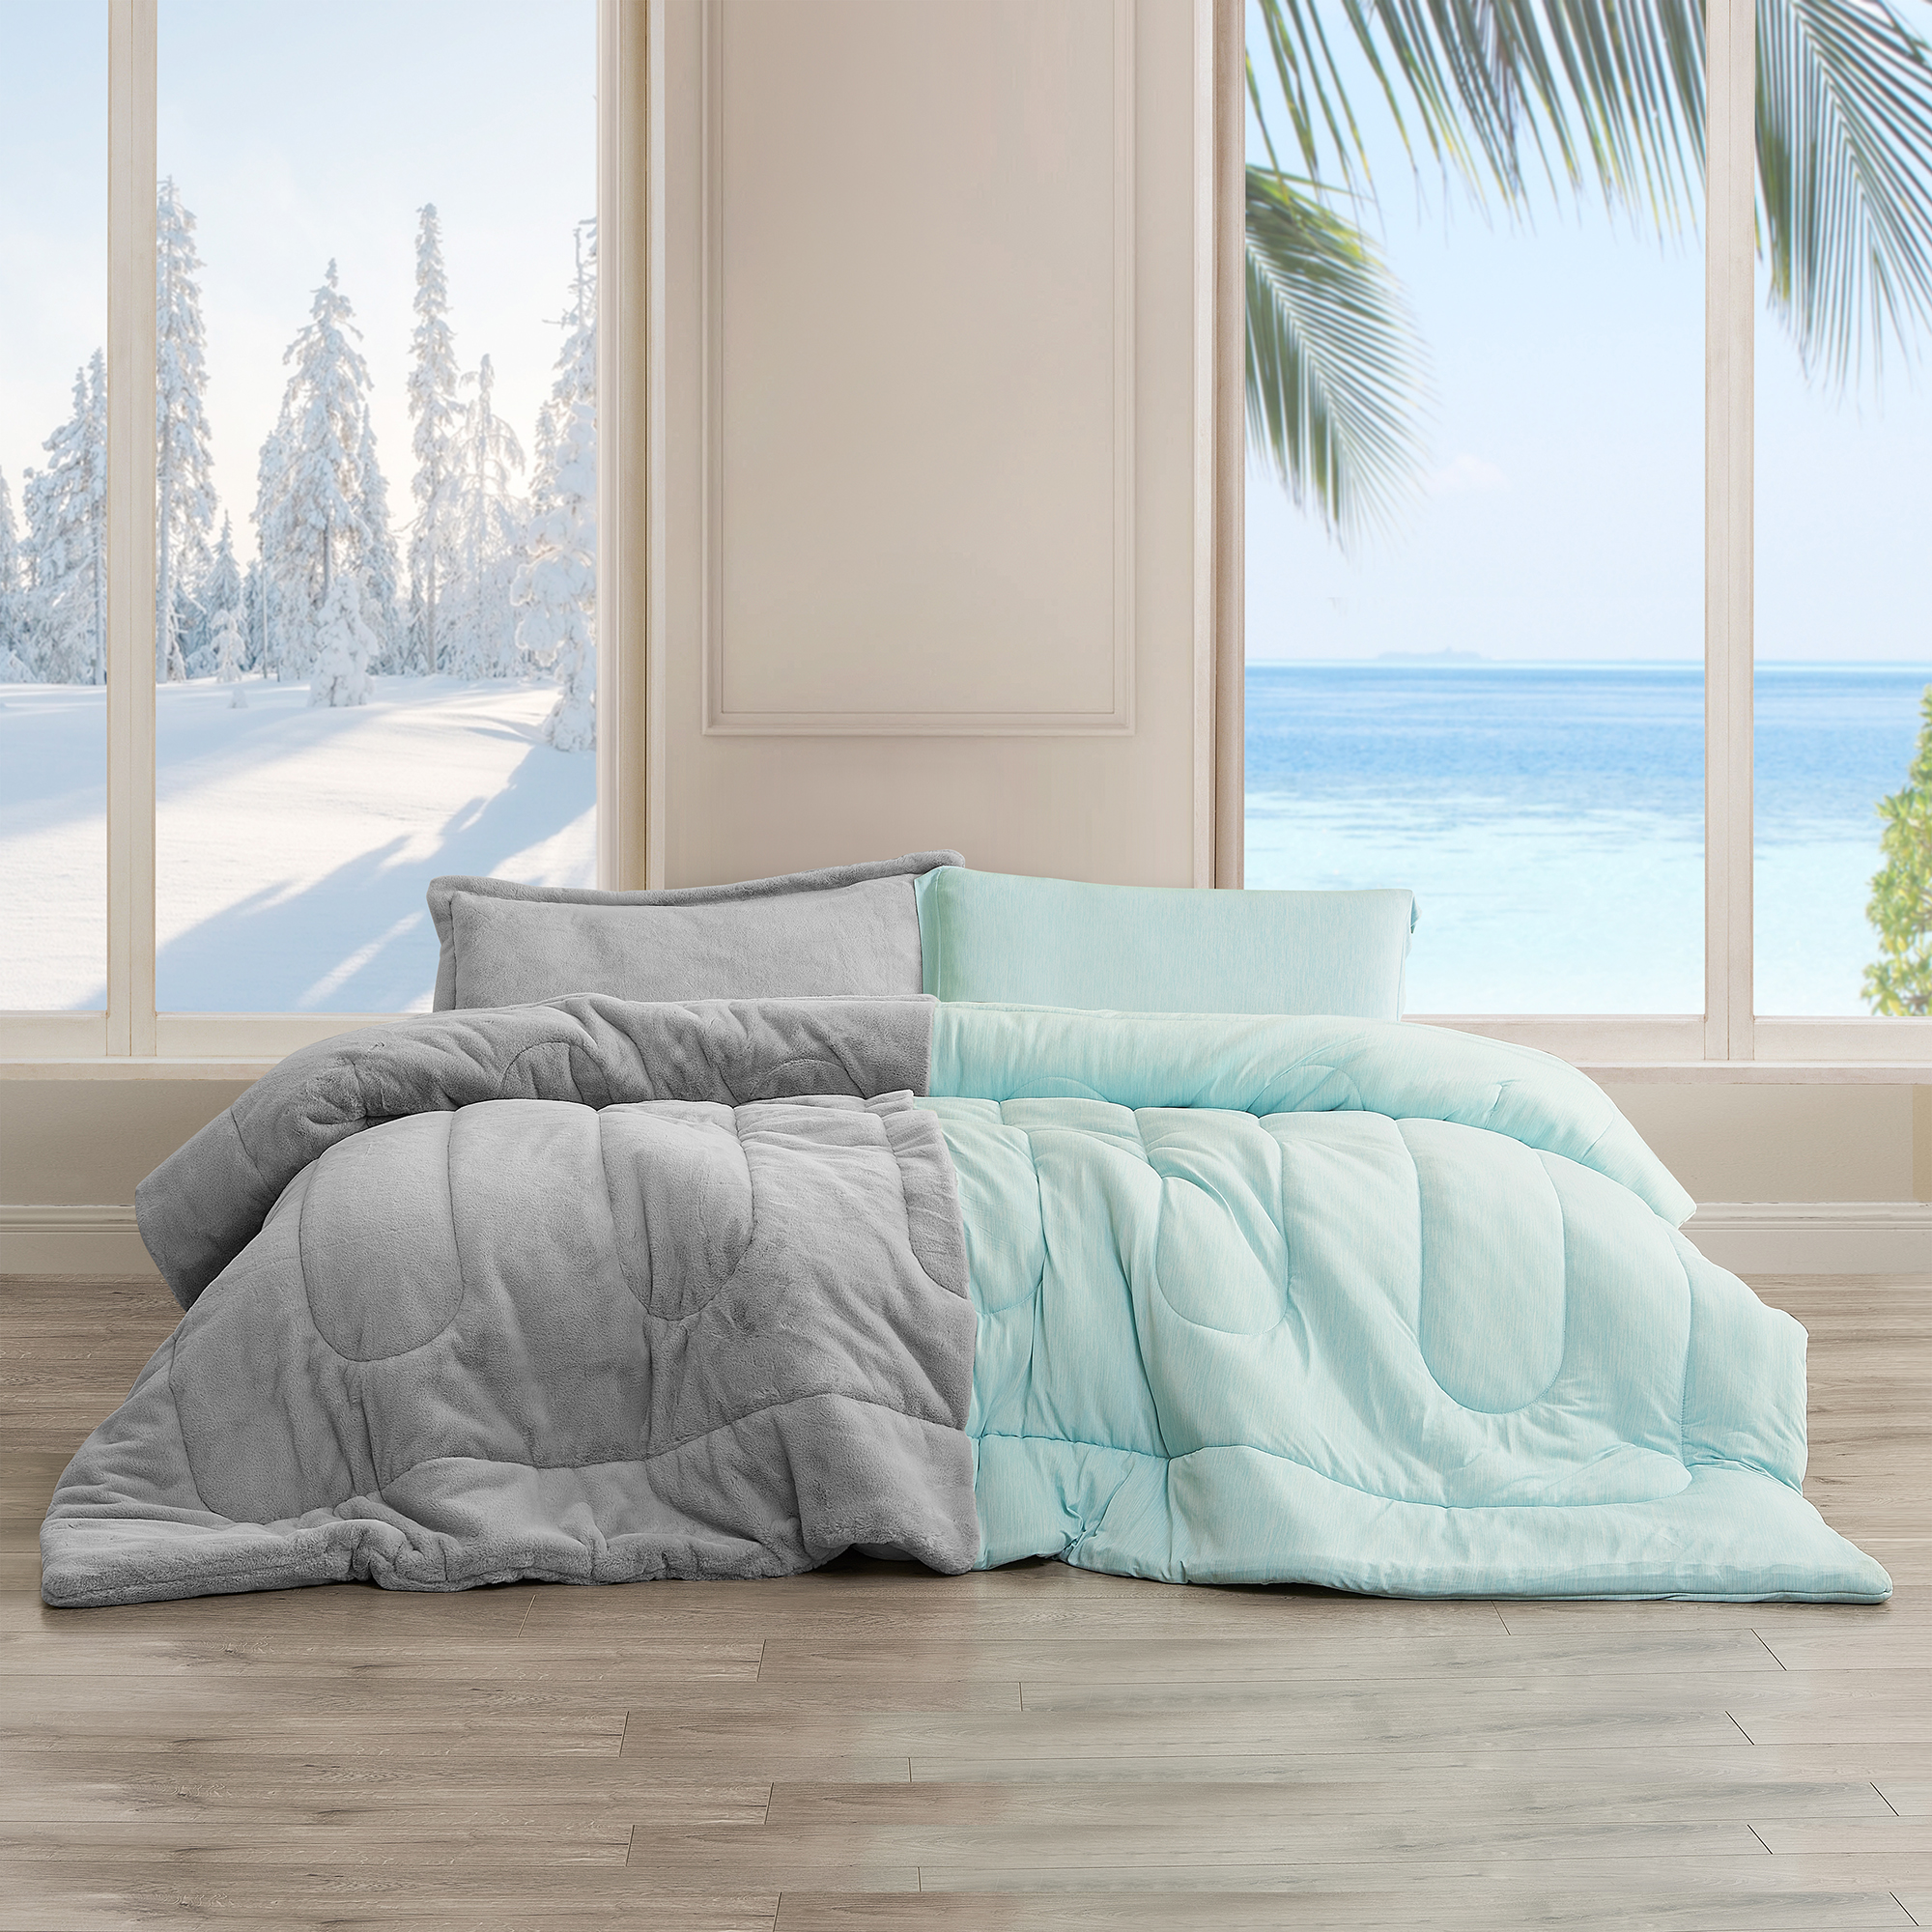 Opposites Attract - Coma Inducer Oversized Queen Comforter - Plush Koala Gray + Cooling Caribbean Green